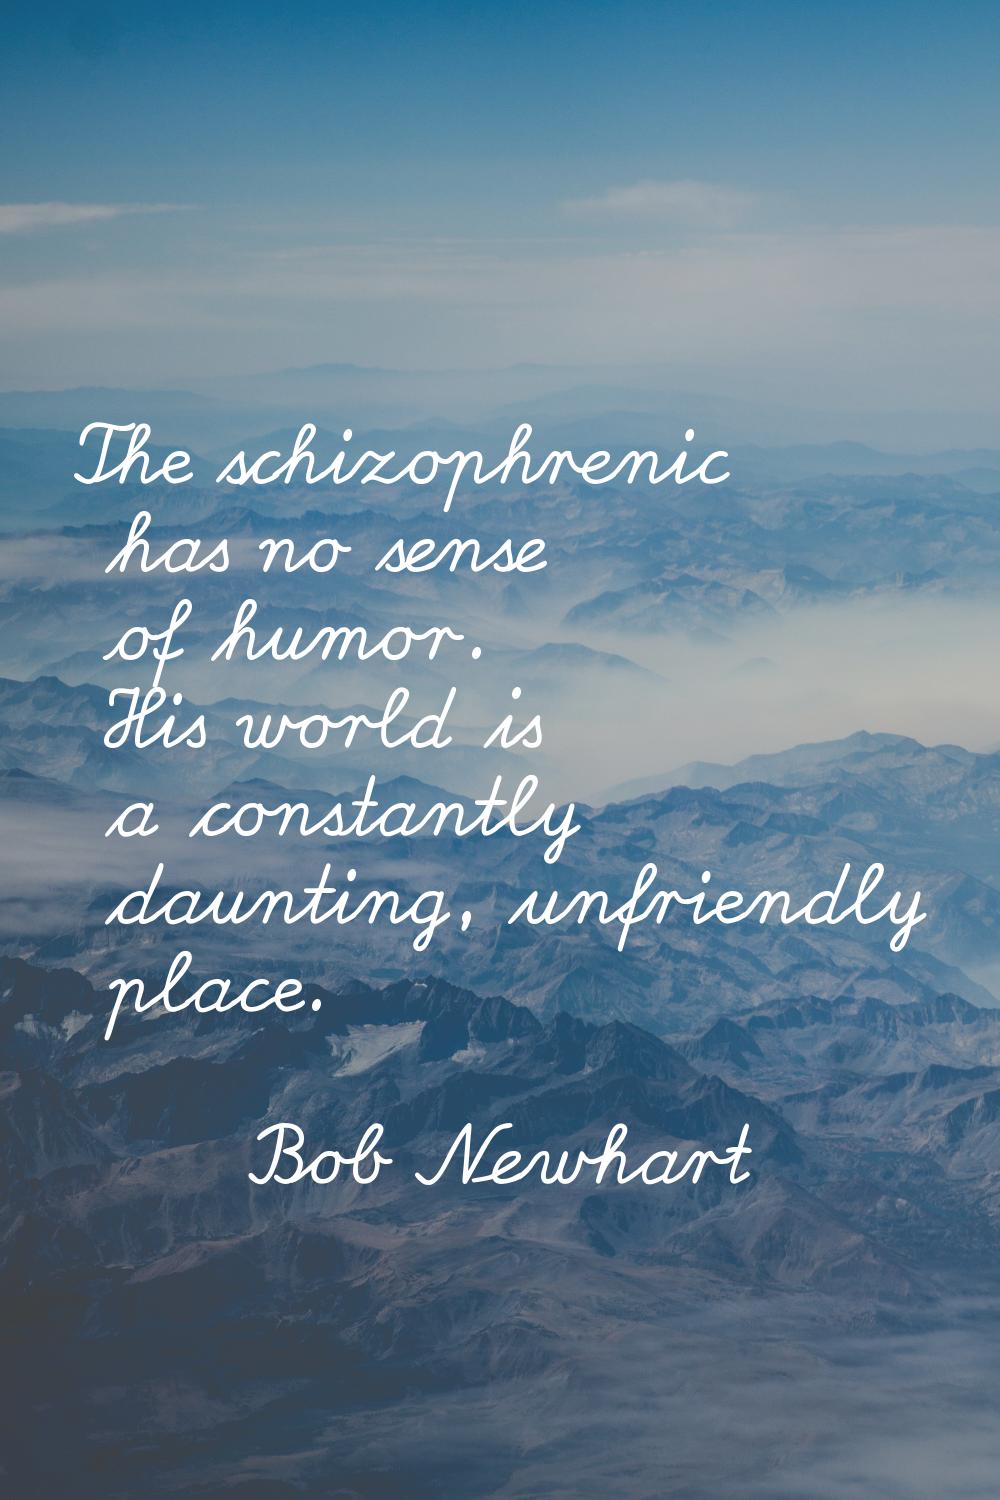 The schizophrenic has no sense of humor. His world is a constantly daunting, unfriendly place.